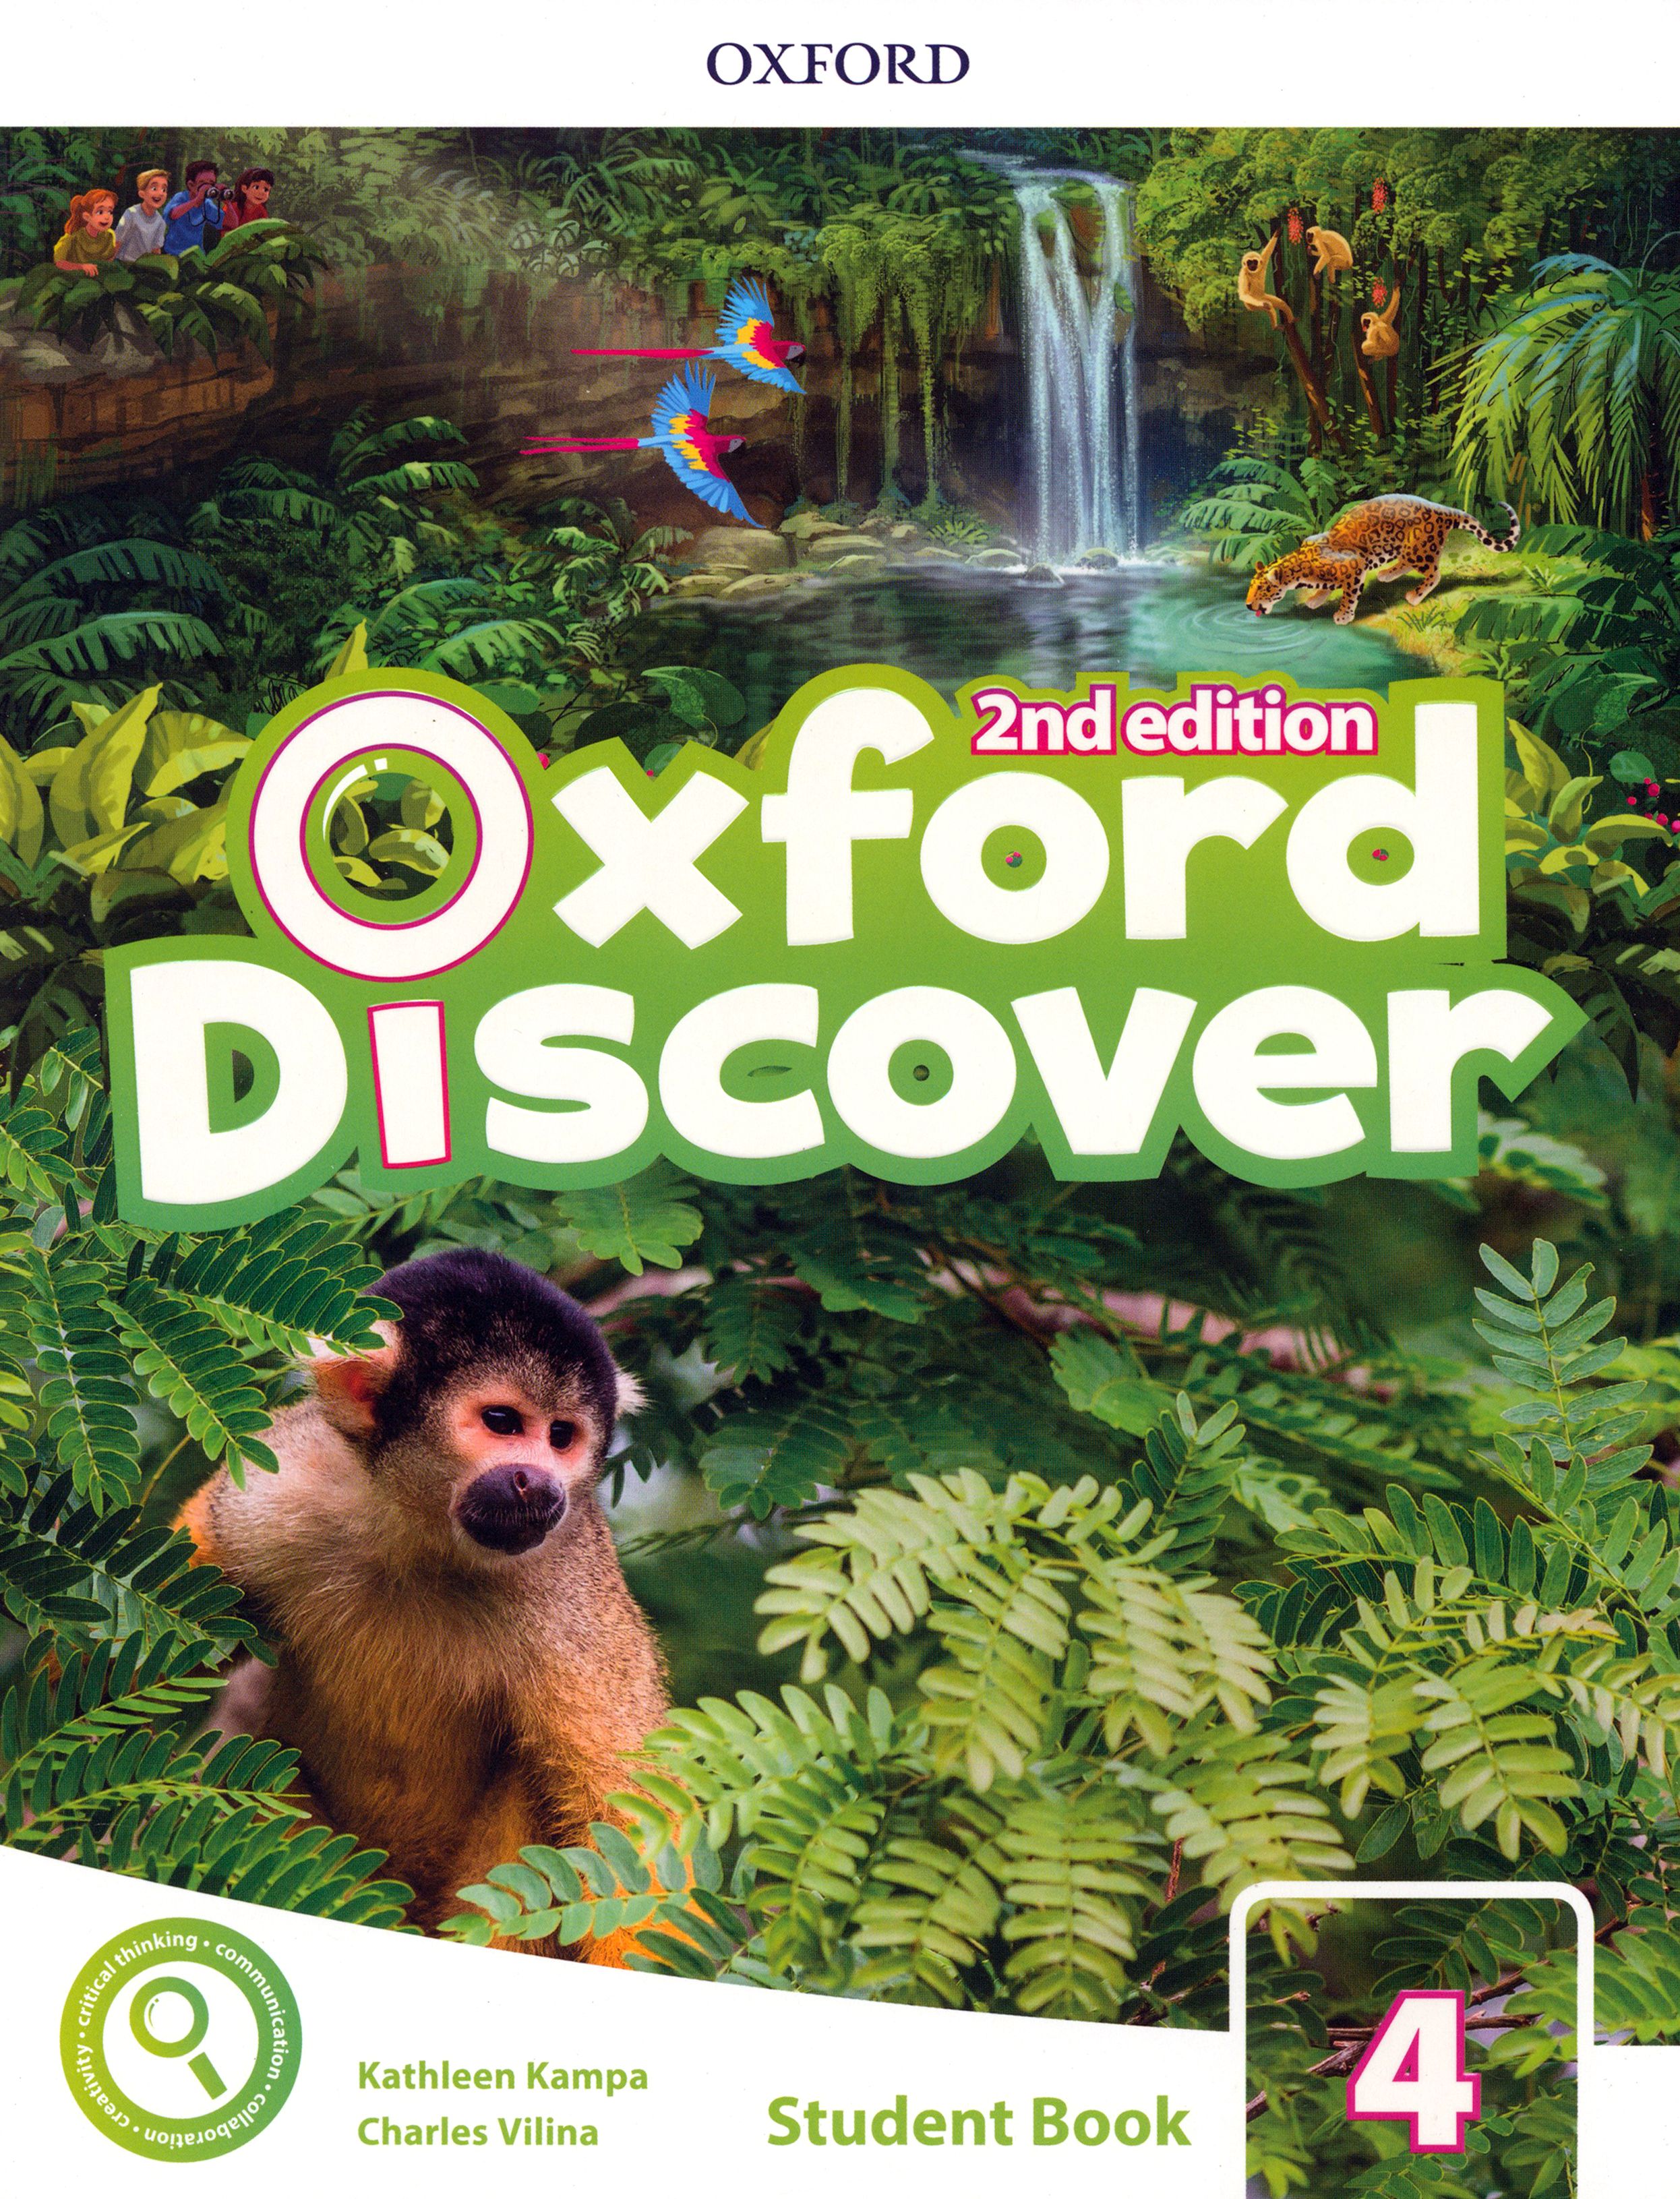 Oxford discover 4 2nd Edition. Oxford discover 2nd Edition 5. Oxford discover 2nd Edition. Oxford discover 2 student book. Oxford discover 4